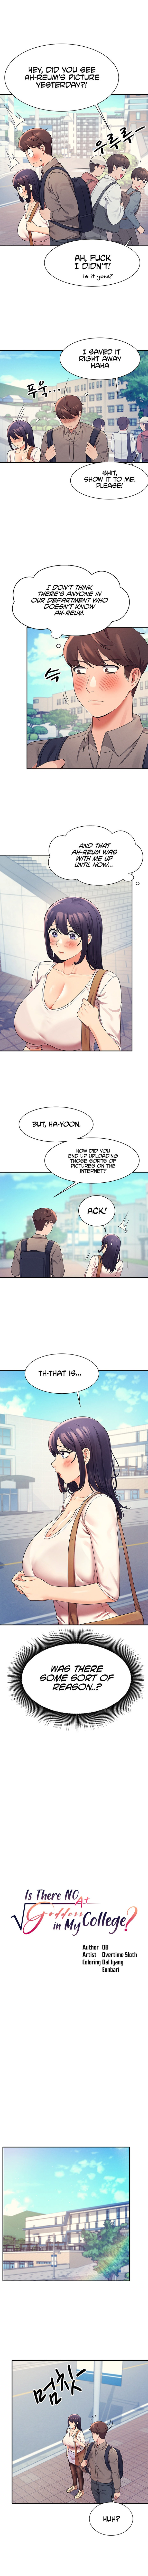 Is There No Goddess in My College? - Chapter 21 Page 2